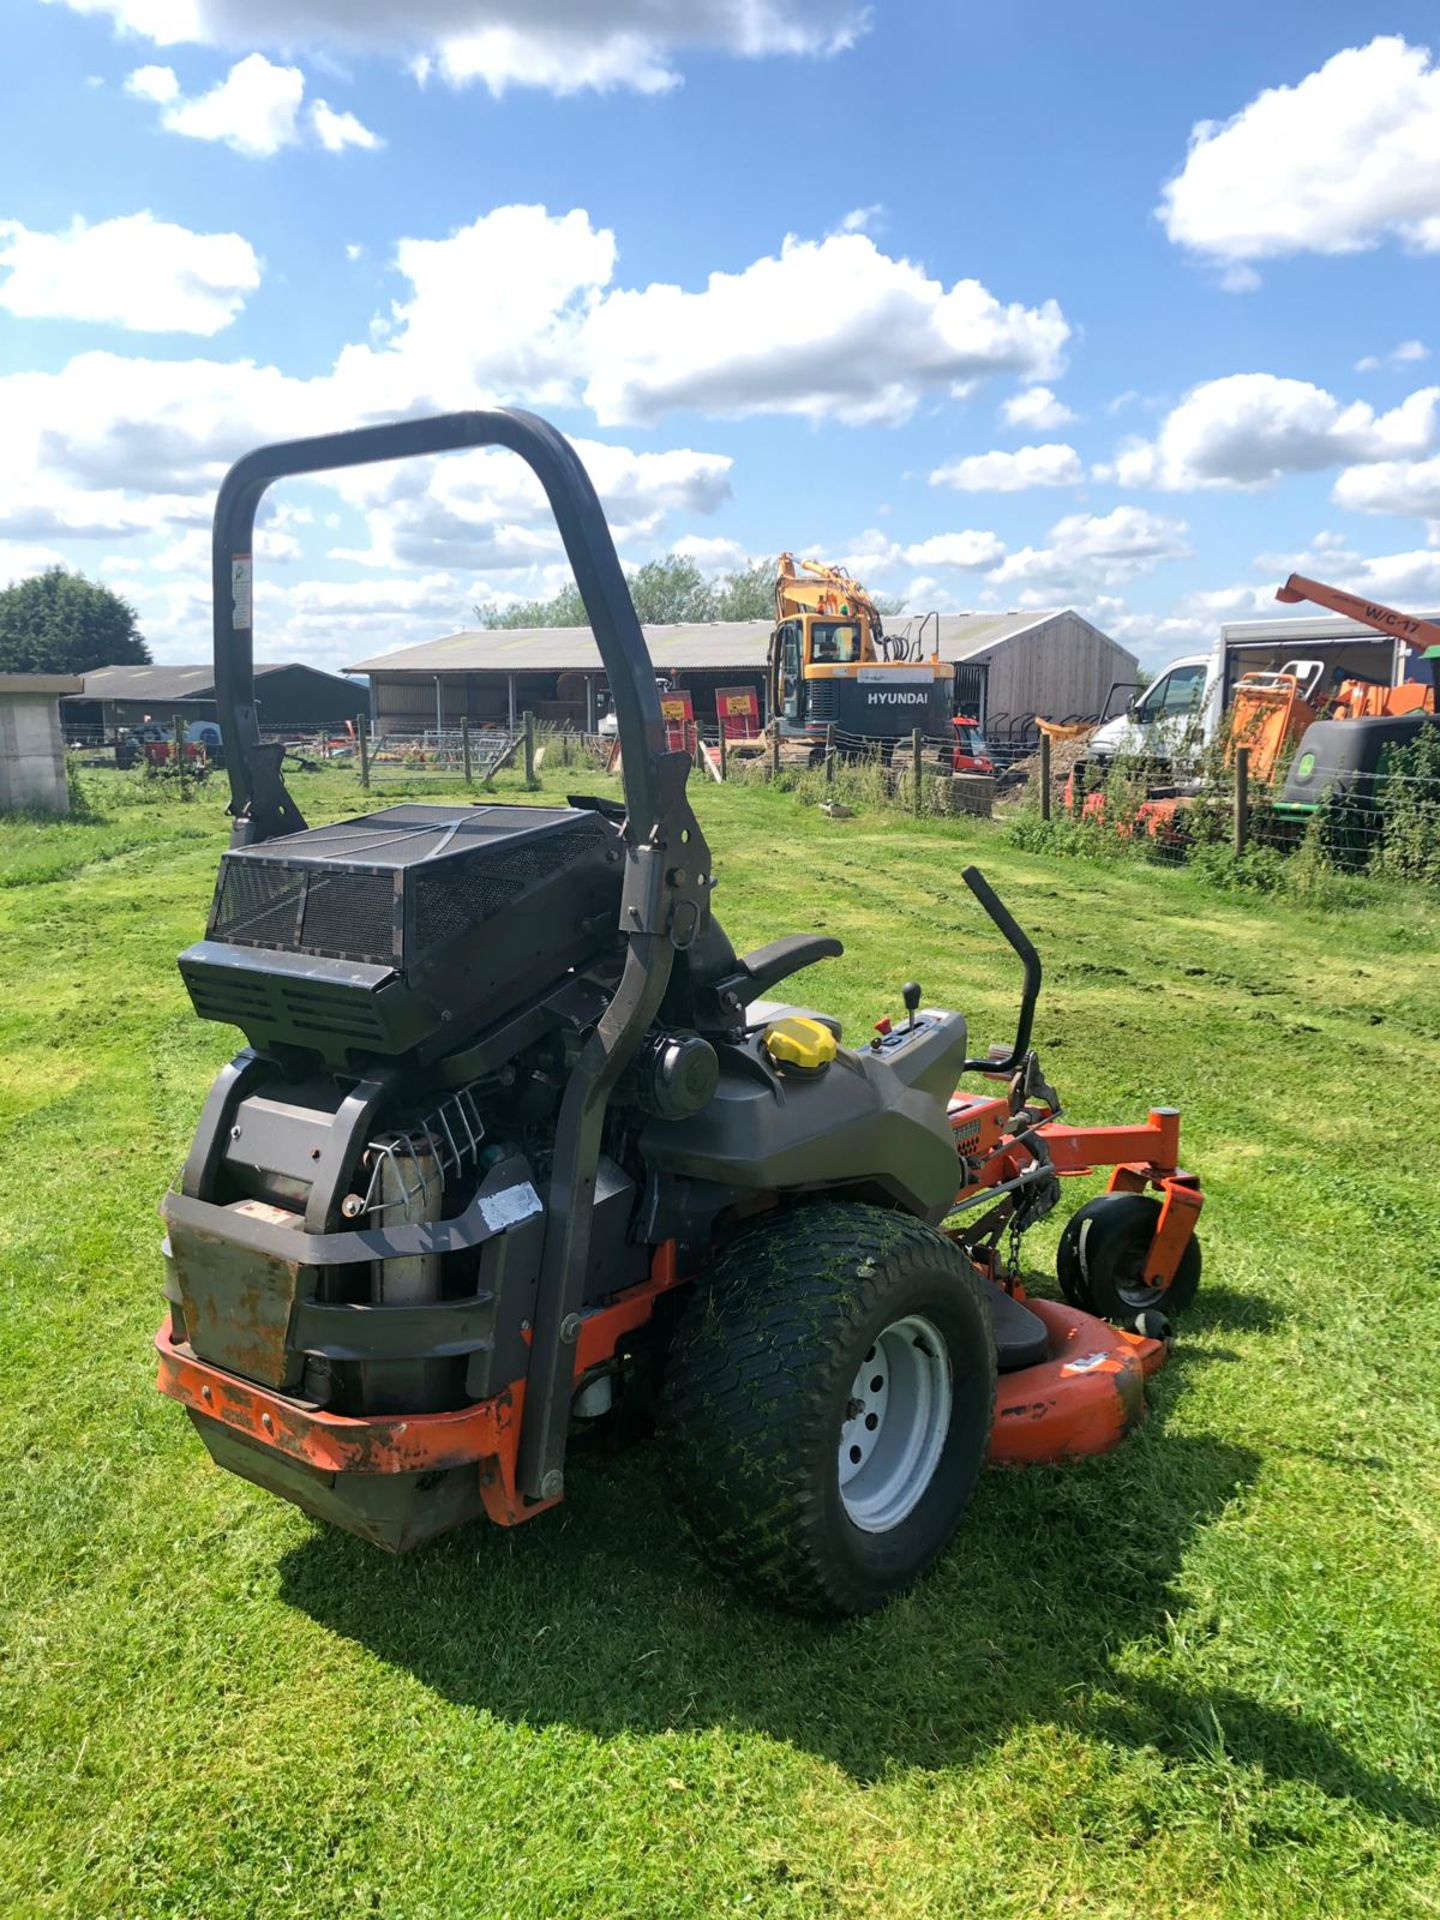 HUSQVARNA ZERO TURN RIDE ON LAWN MOWR, RUNS, WORKS AND CUTS, ONLY 900 HOURS FROM NEW *PLUS VAT* - Image 3 of 6